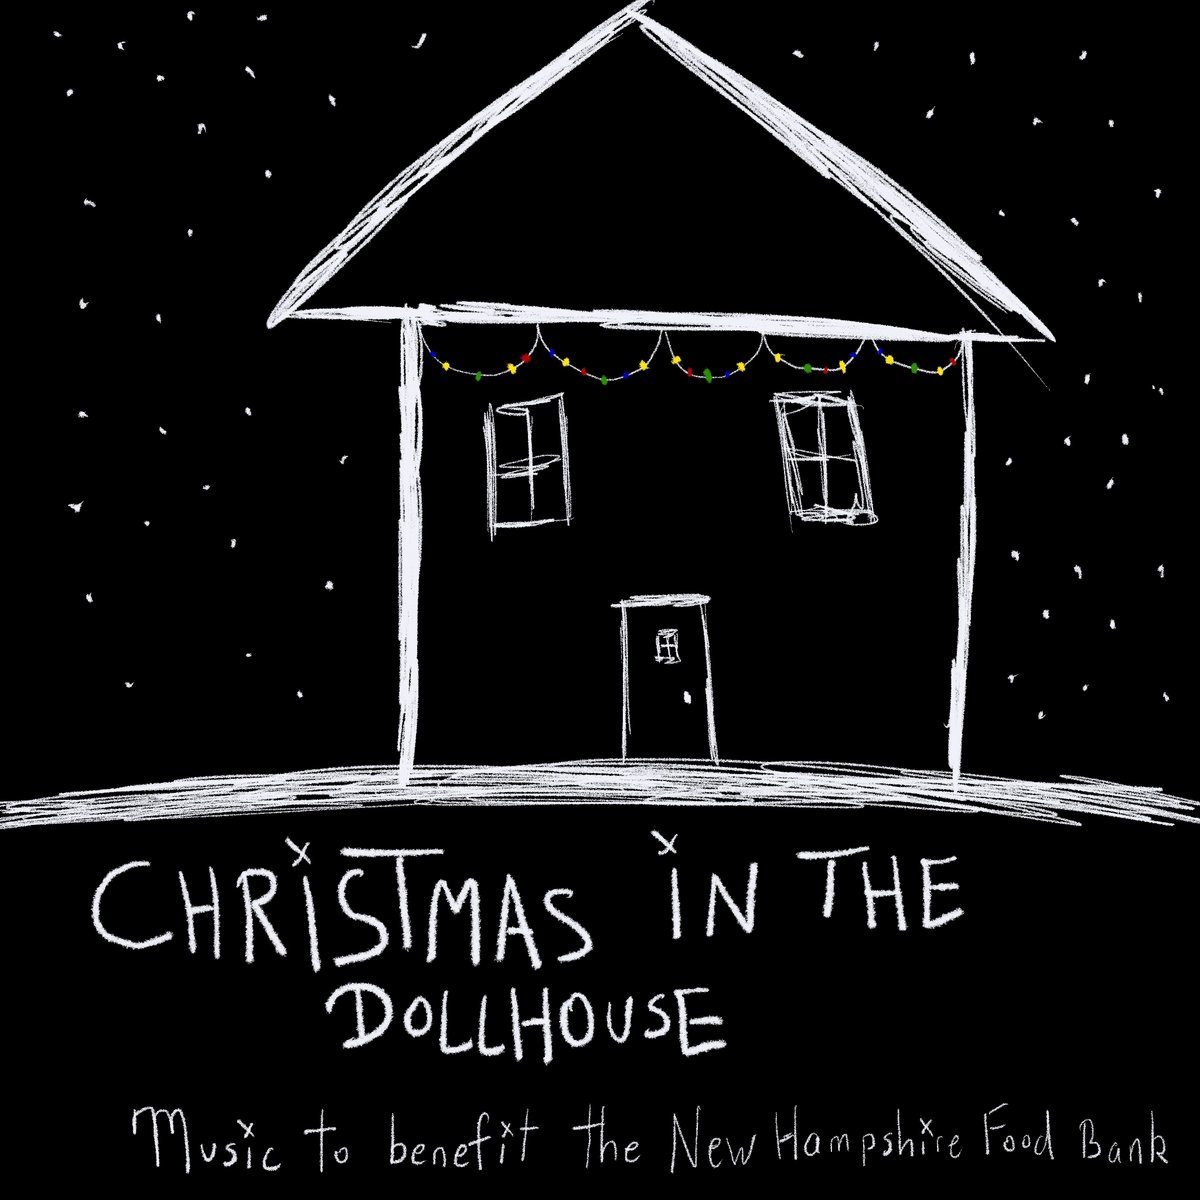 Christmas in the Dollhouse